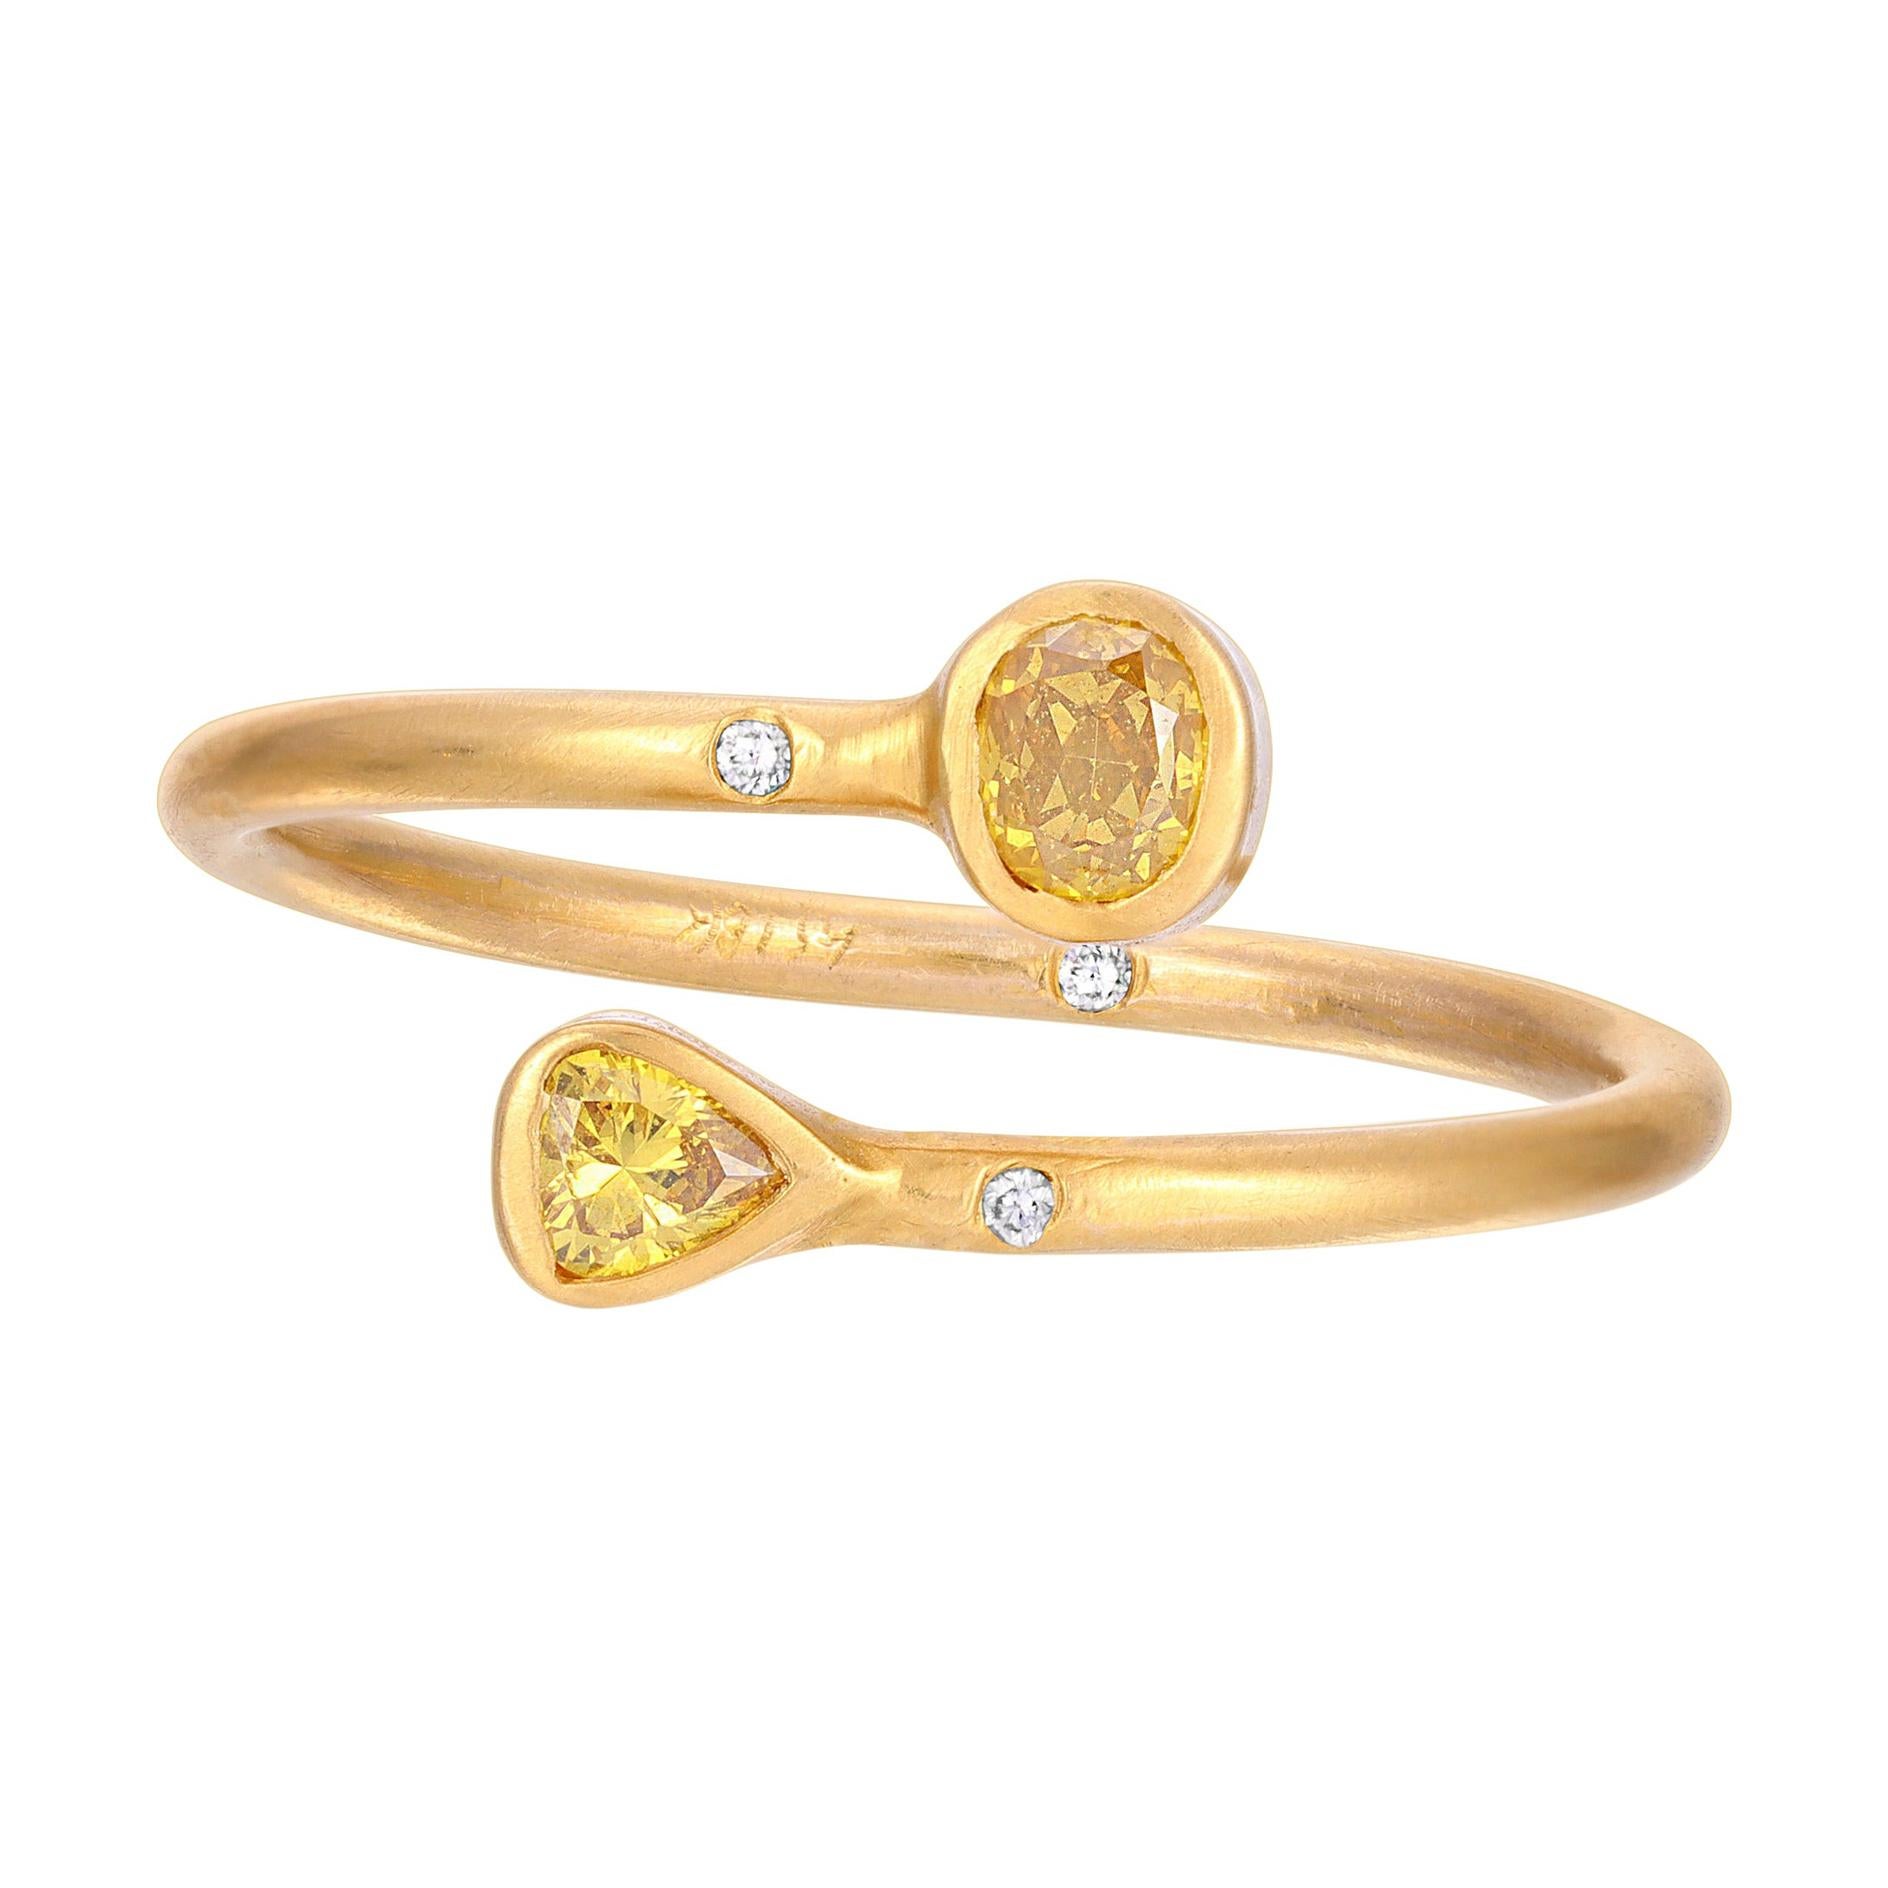 This .16ct Dainty Yellow Rose Cut Diamond wrap ring is bezel set with Diamond accents.  It is set in 18k Matte Finish Yellow Gold. The ring is a size 6 1/2 and was handmade in Los Angeles. All Diamonds are ethically sourced. 